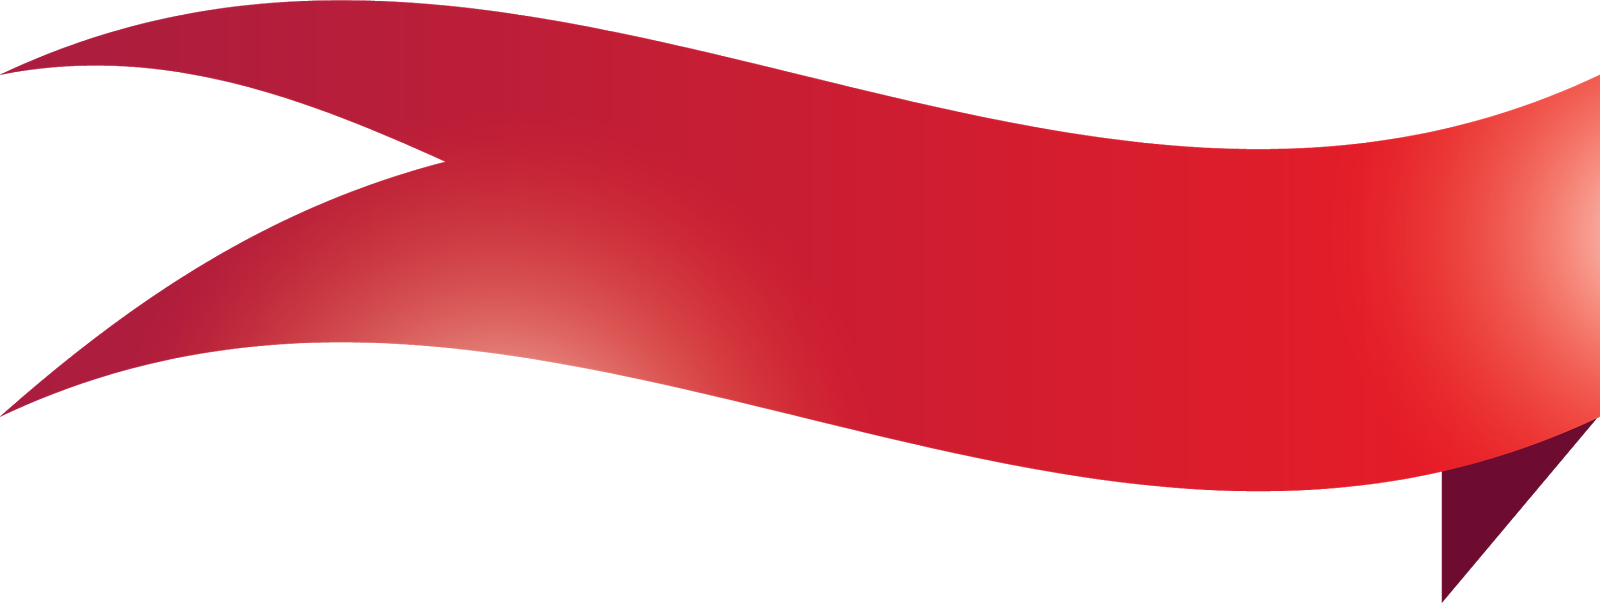 A Red Flag On A Black Background PNG